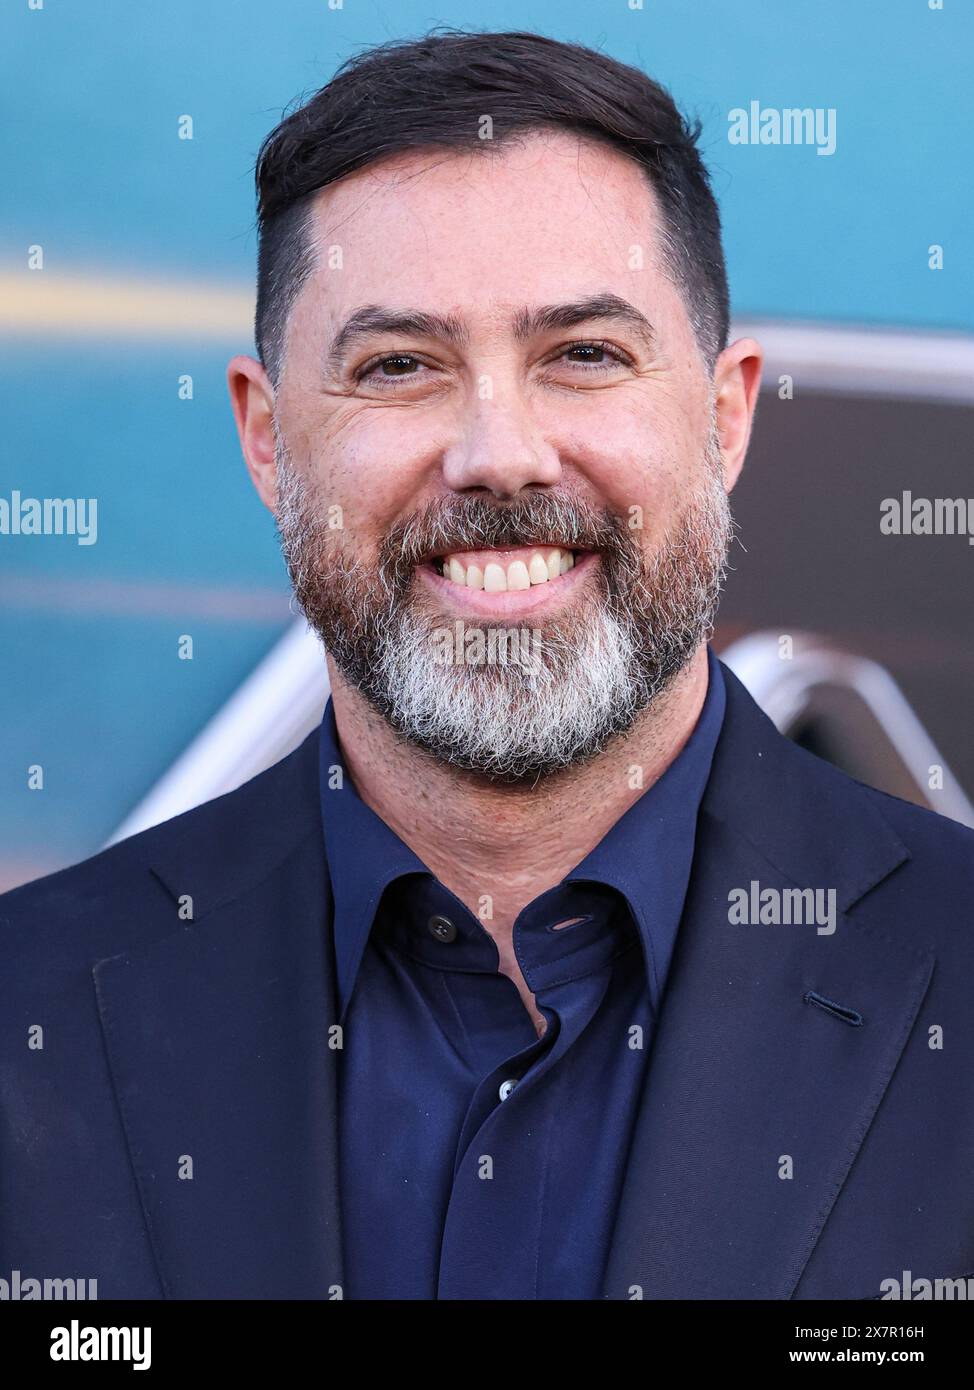 HOLLYWOOD, LOS ANGELES, CALIFORNIA, USA - MAY 20: Brad Peyton arrives at the Los Angeles Premiere Of Netflix's 'Atlas' held at The Egyptian Theatre Hollywood on May 20, 2024 in Hollywood, Los Angeles, California, United States. (Photo by Xavier Collin/Image Press Agency) Stock Photo